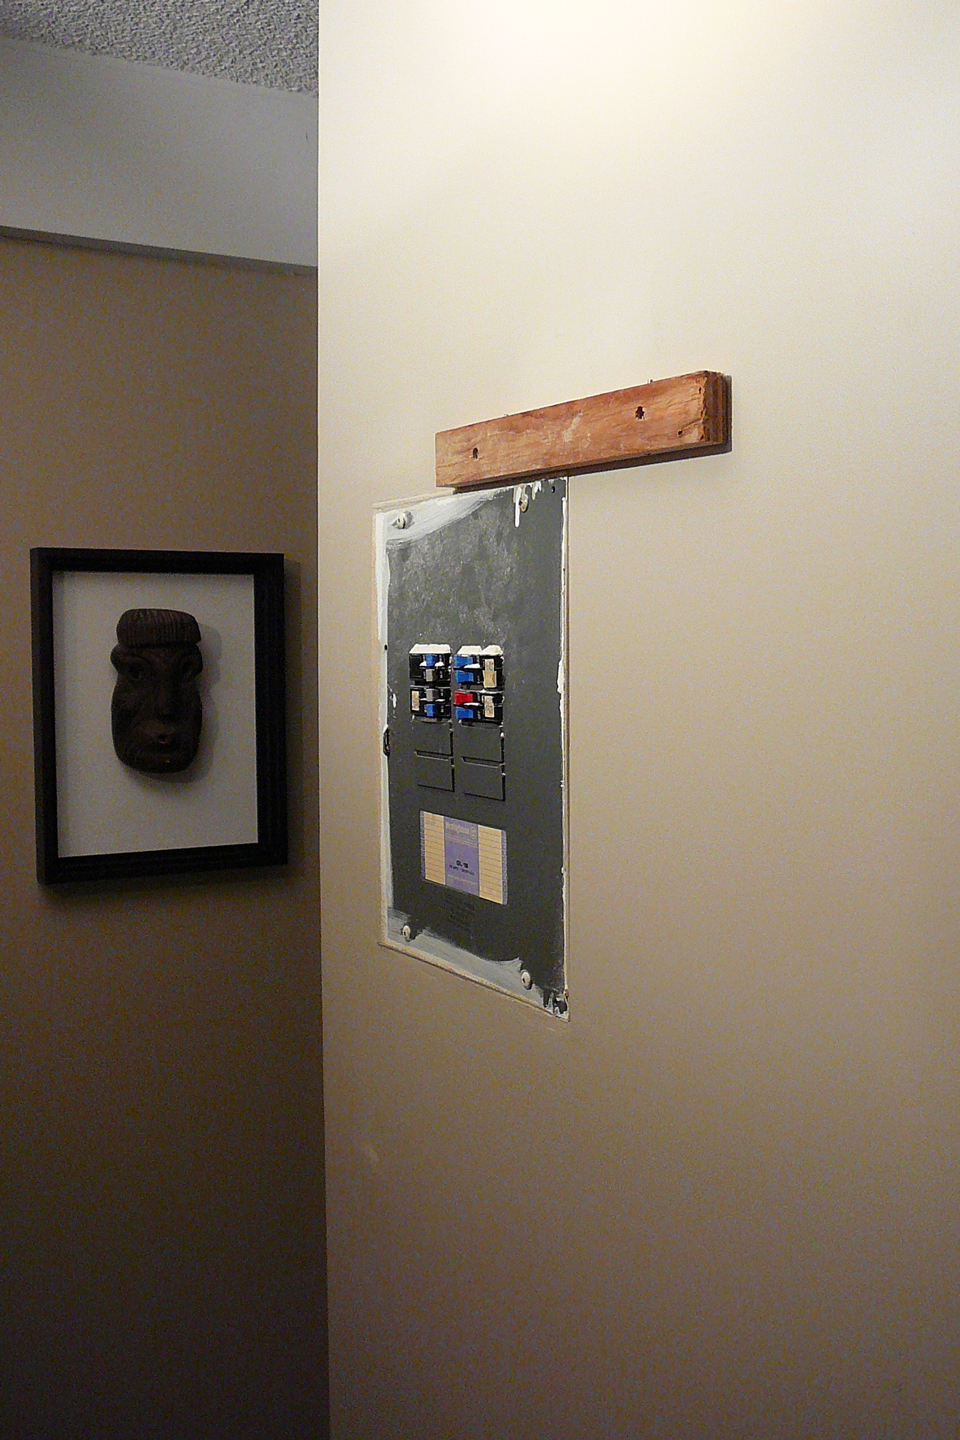 Utility box on a living room wall